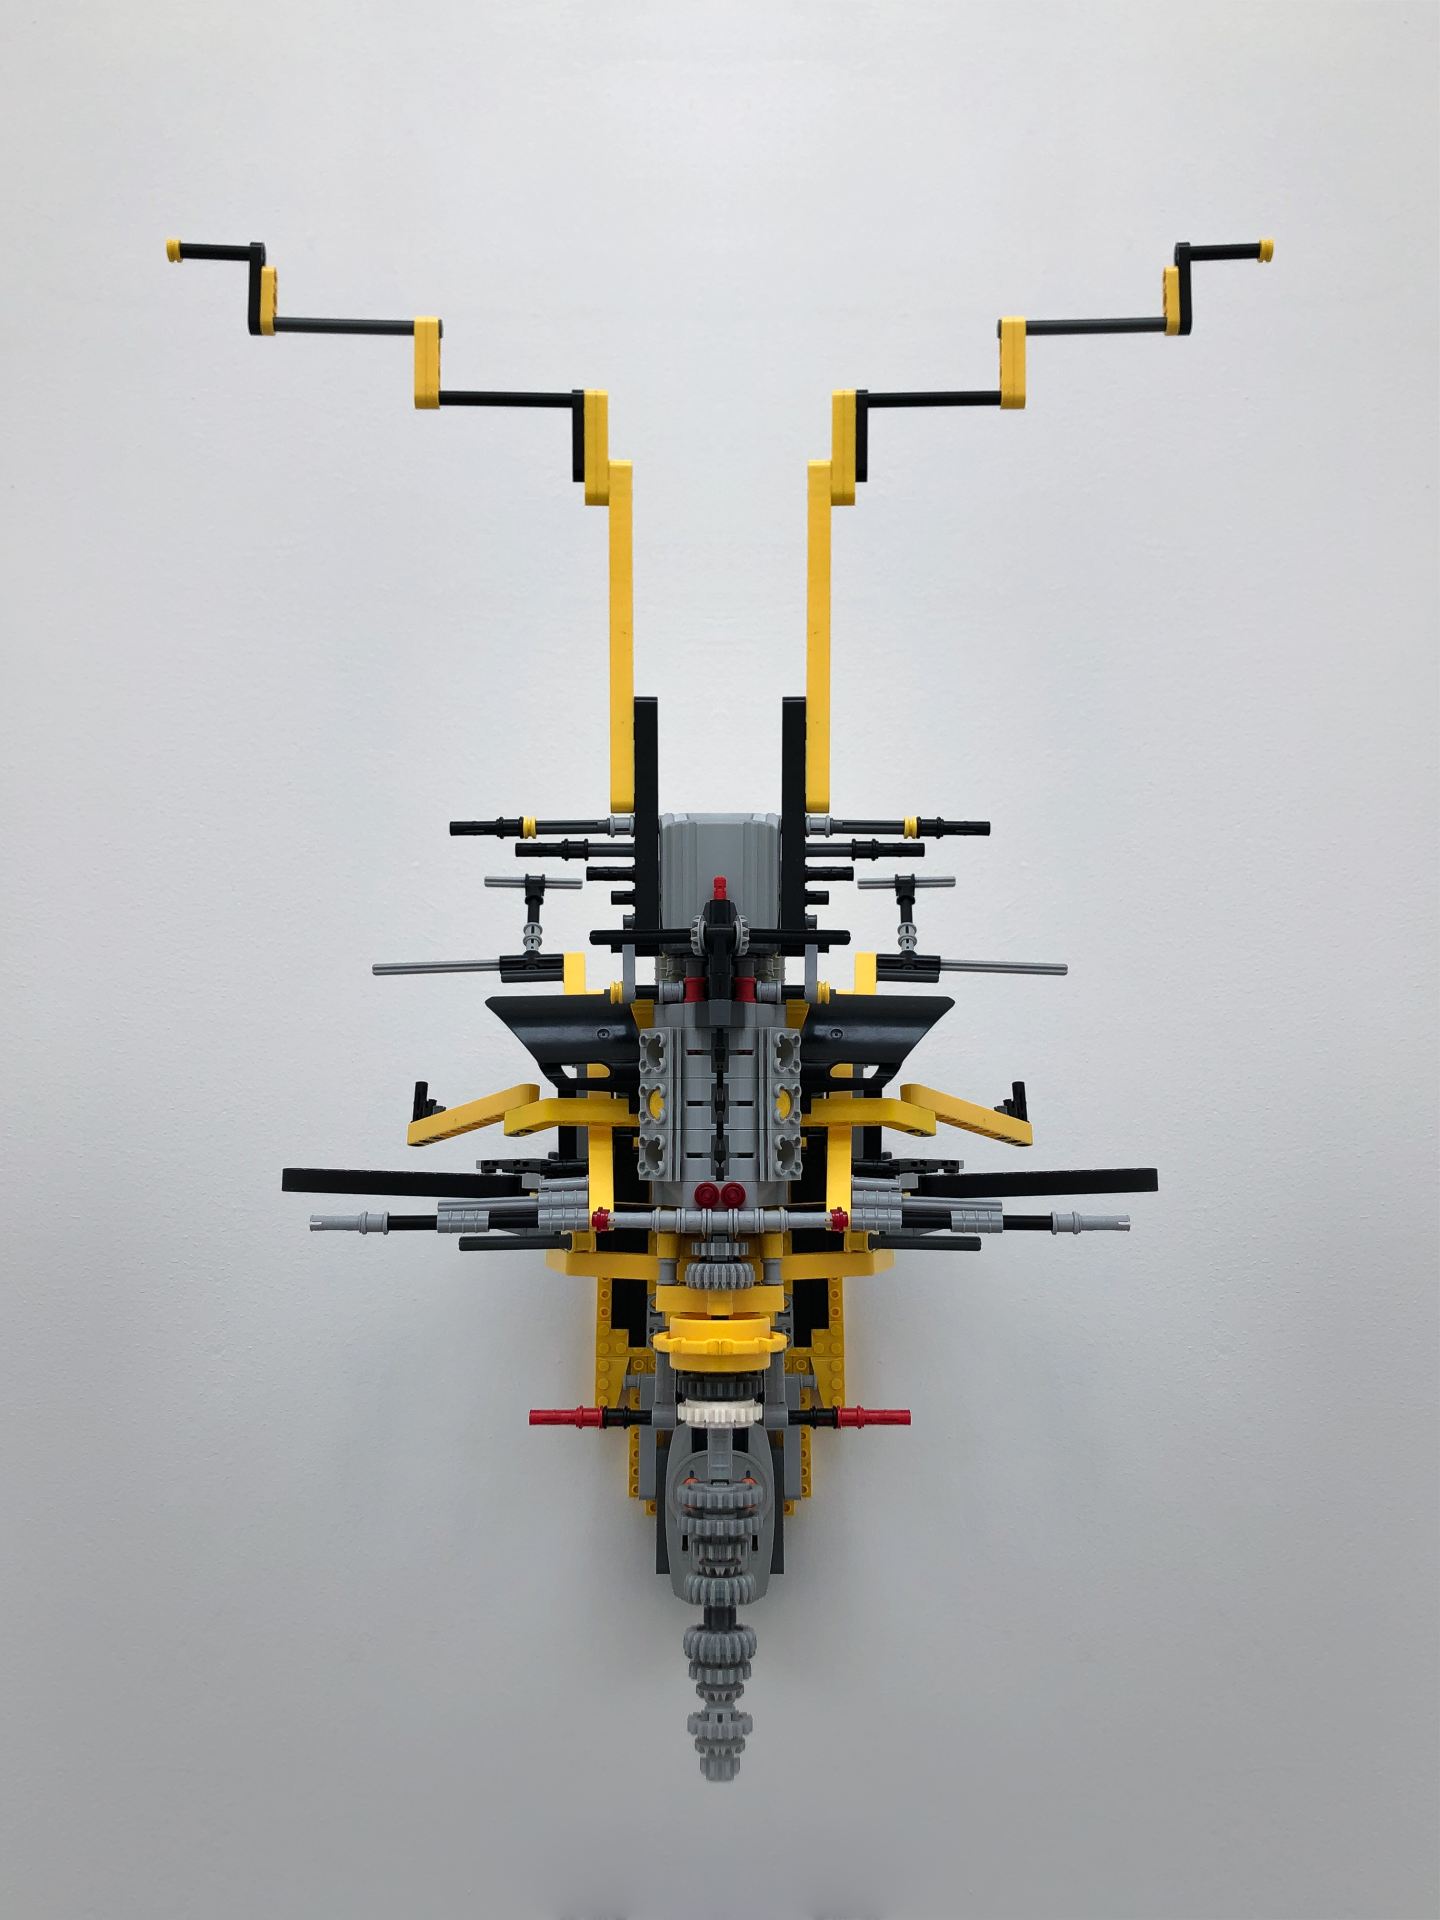 An image of a sculpture made out of Lego, against a white wall.